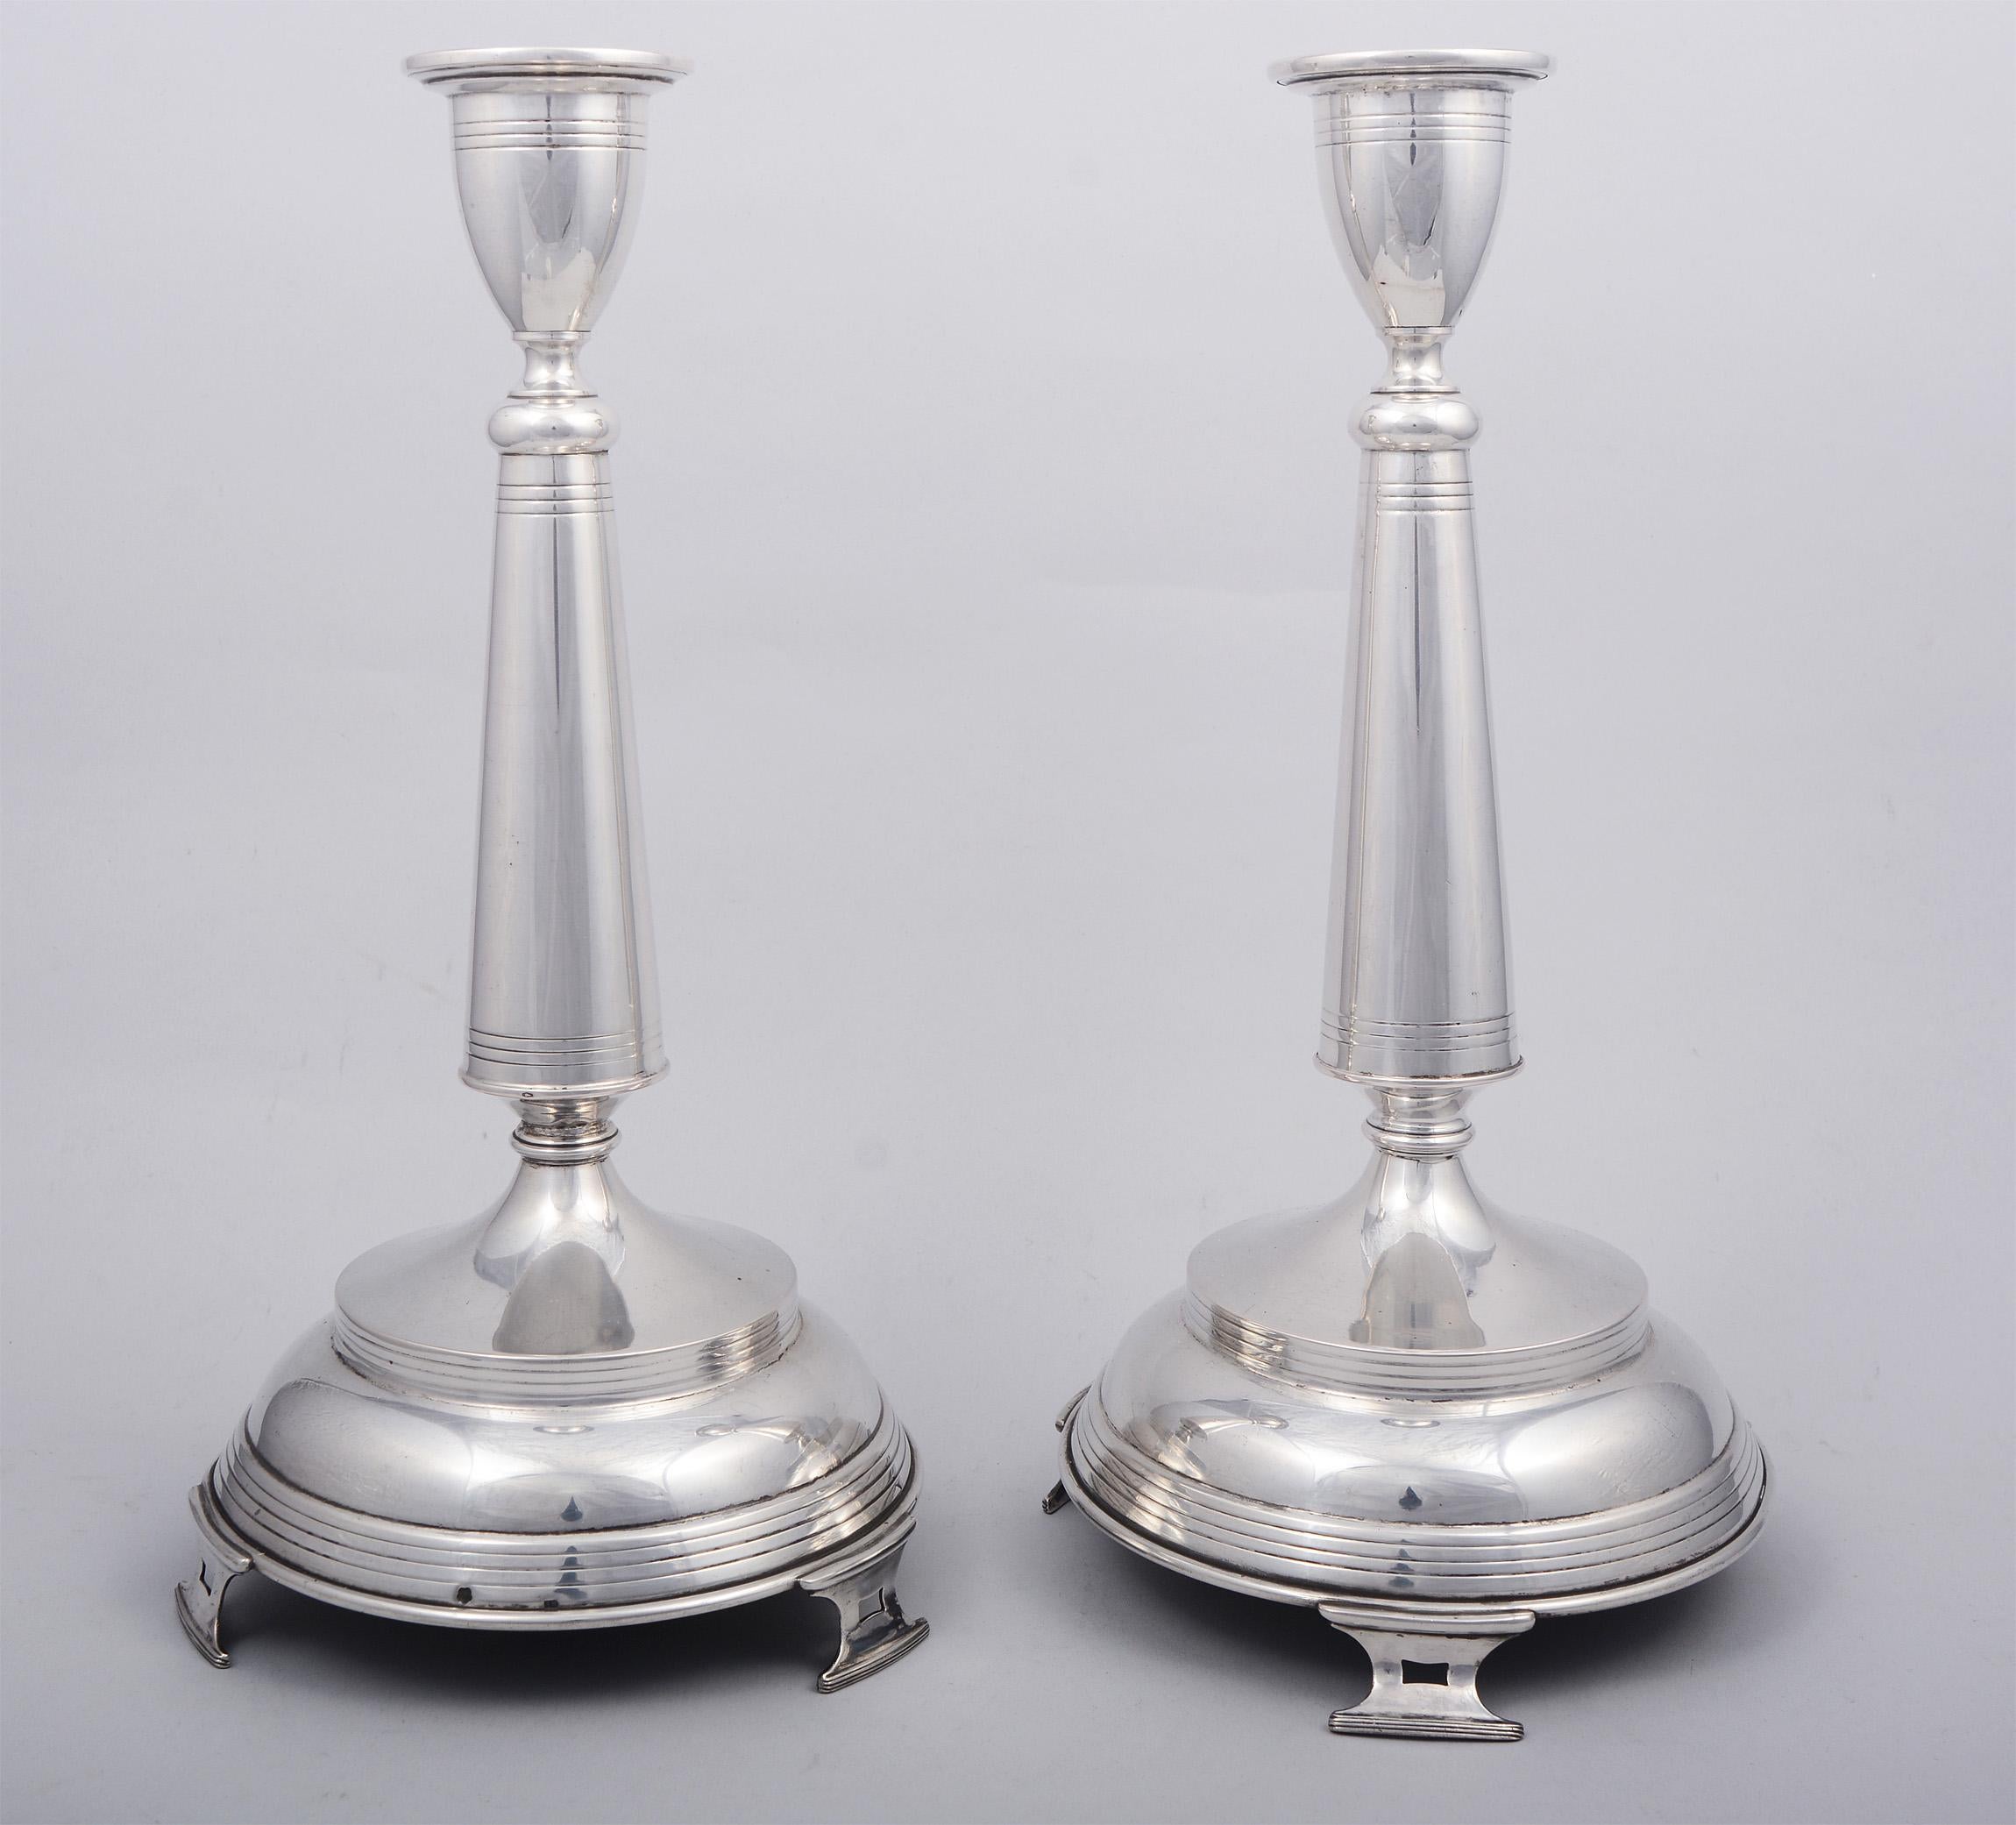 Pair of Austro-Hungarian 800 silver candlesticks with a Vienna Secessionist influence. These have a Vienna assayers hallmark. They are slightly bent at the narrow portion above the base causing the top half of each of these to lean a little. There